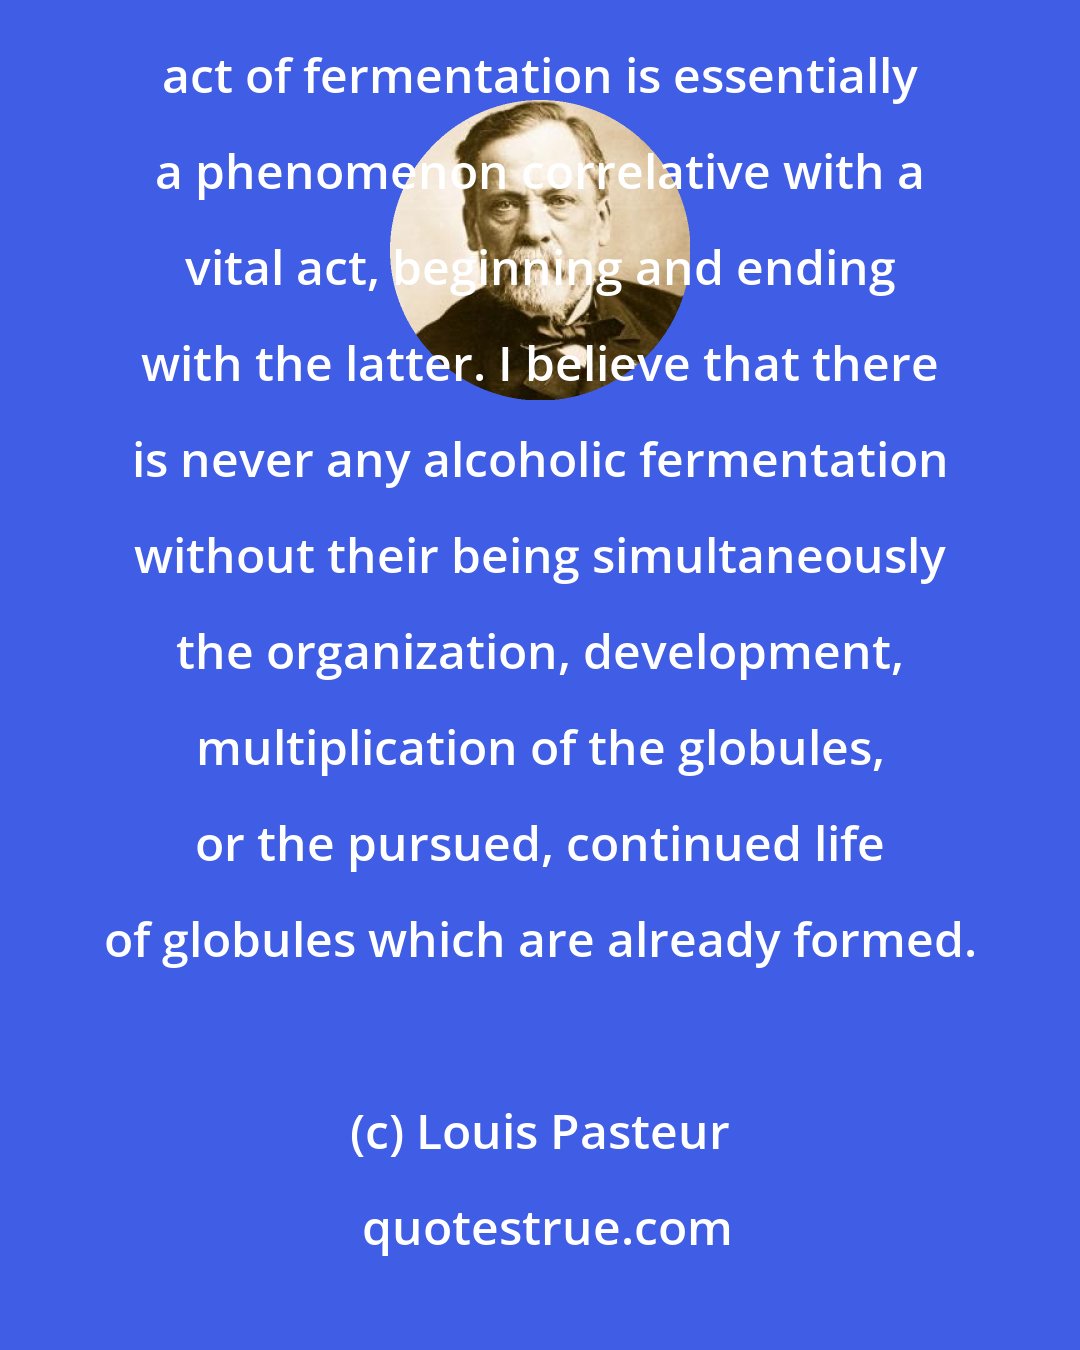 Louis Pasteur: My present and most fixed opinion regarding the nature of alcoholic fermentation is this: The chemical act of fermentation is essentially a phenomenon correlative with a vital act, beginning and ending with the latter. I believe that there is never any alcoholic fermentation without their being simultaneously the organization, development, multiplication of the globules, or the pursued, continued life of globules which are already formed.